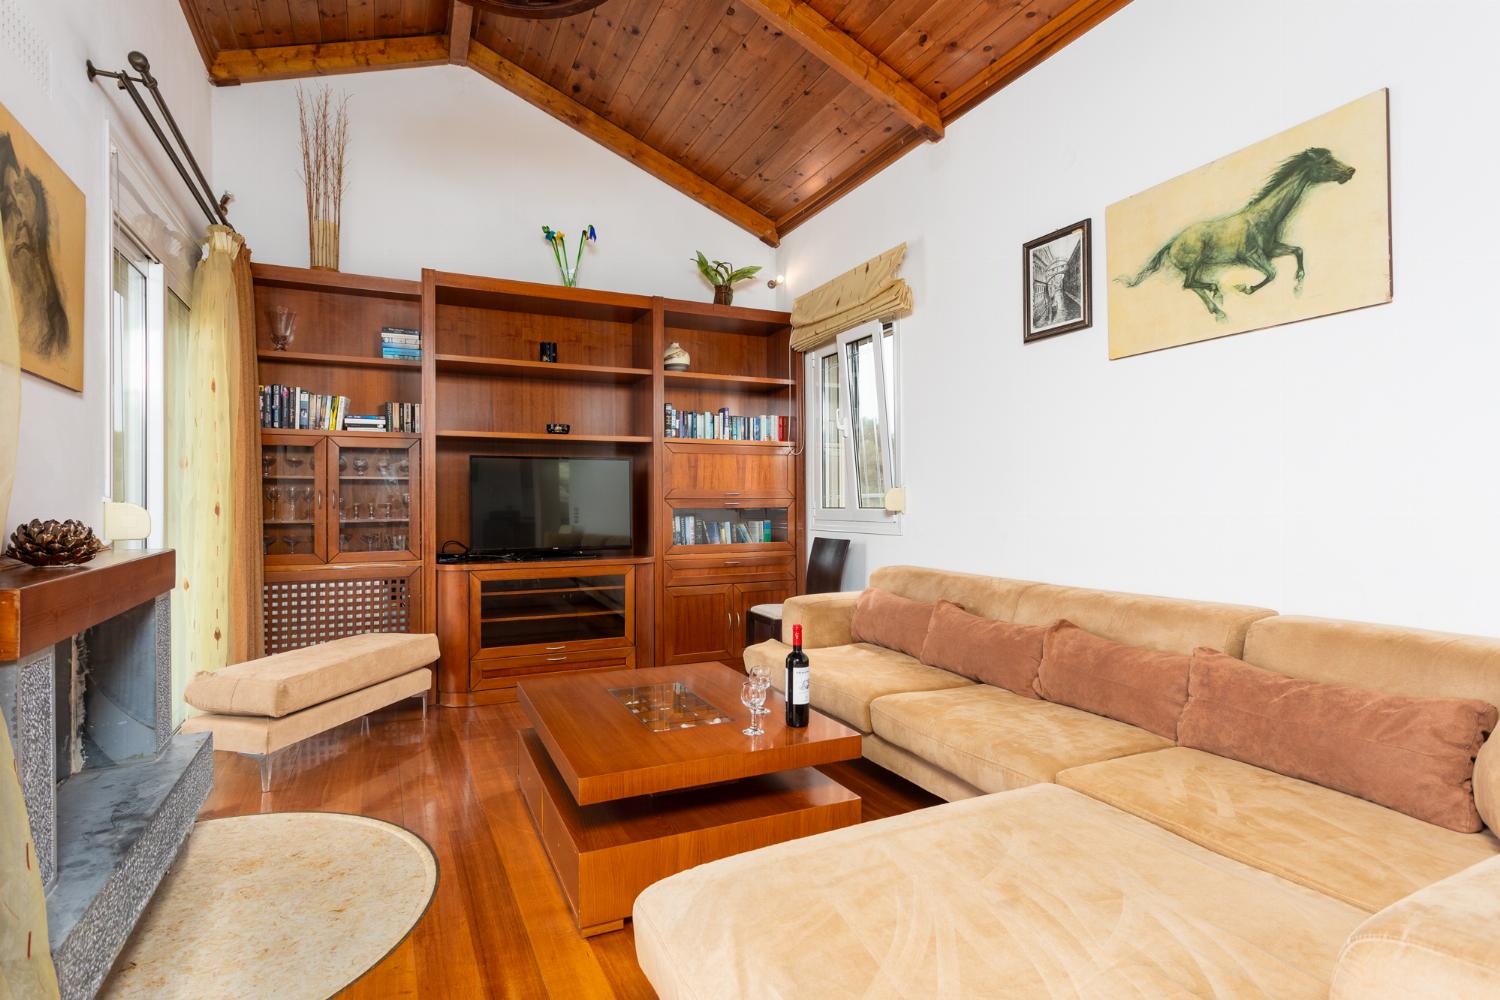 Open-plan living room with sofa, dining area, kitchen, A/C, WiFi internet, satellite TV, and sea views